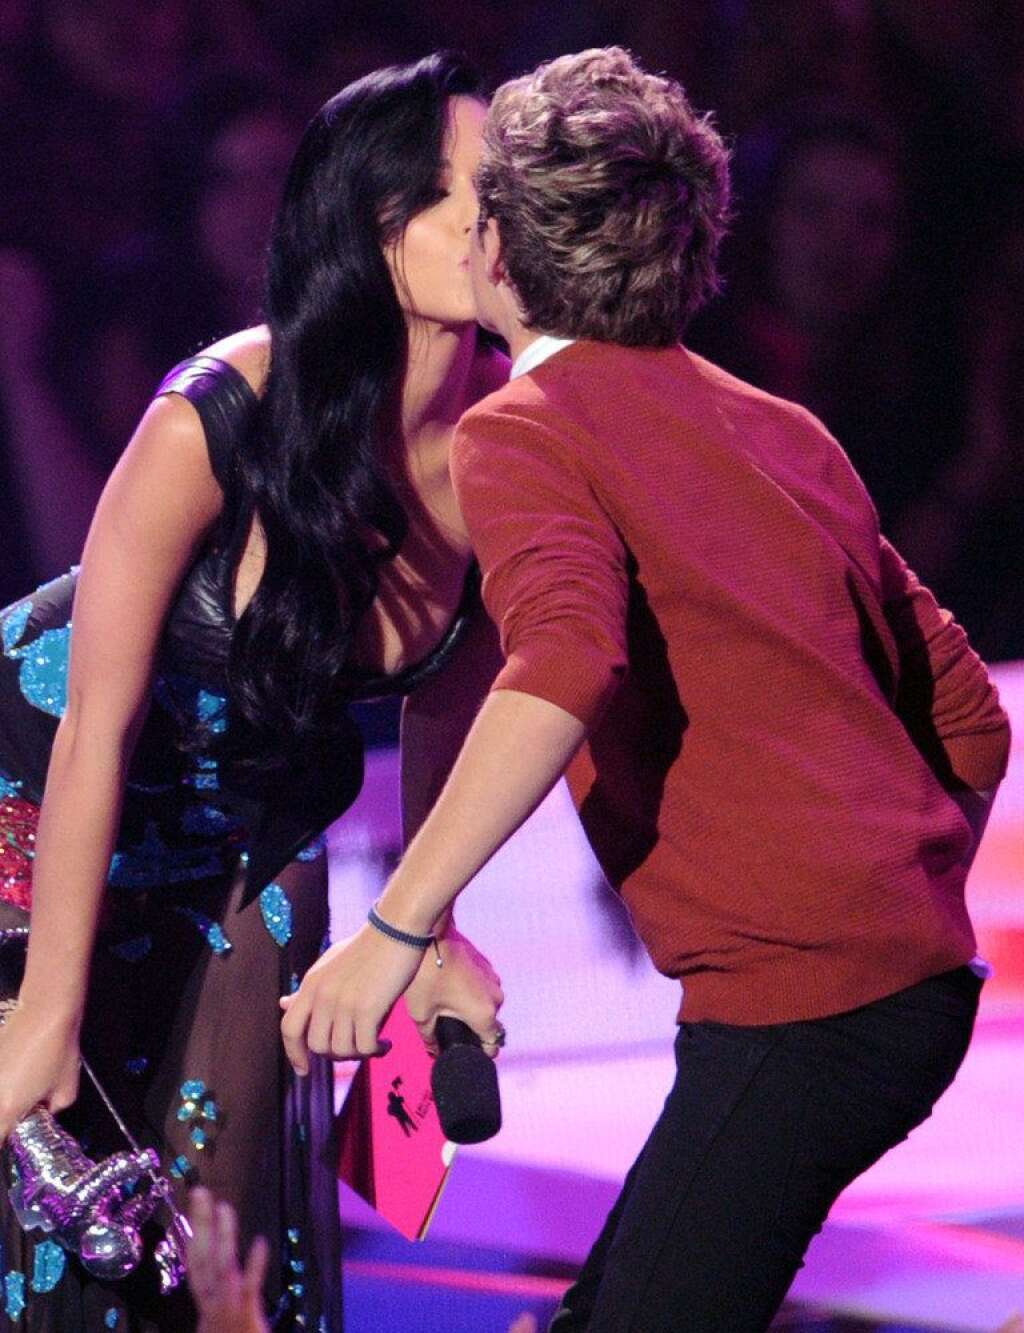 2012 MTV Video Music Awards - Show - LOS ANGELES, CA - SEPTEMBER 06:  (L-R) Singer Niall Horan (R) of One Direction accepts the Best Pop Video award from singer Katy Perry onstage during the 2012 MTV Video Music Awards at Staples Center on September 6, 2012 in Los Angeles, California.  (Photo by Kevin Winter/Getty Images)